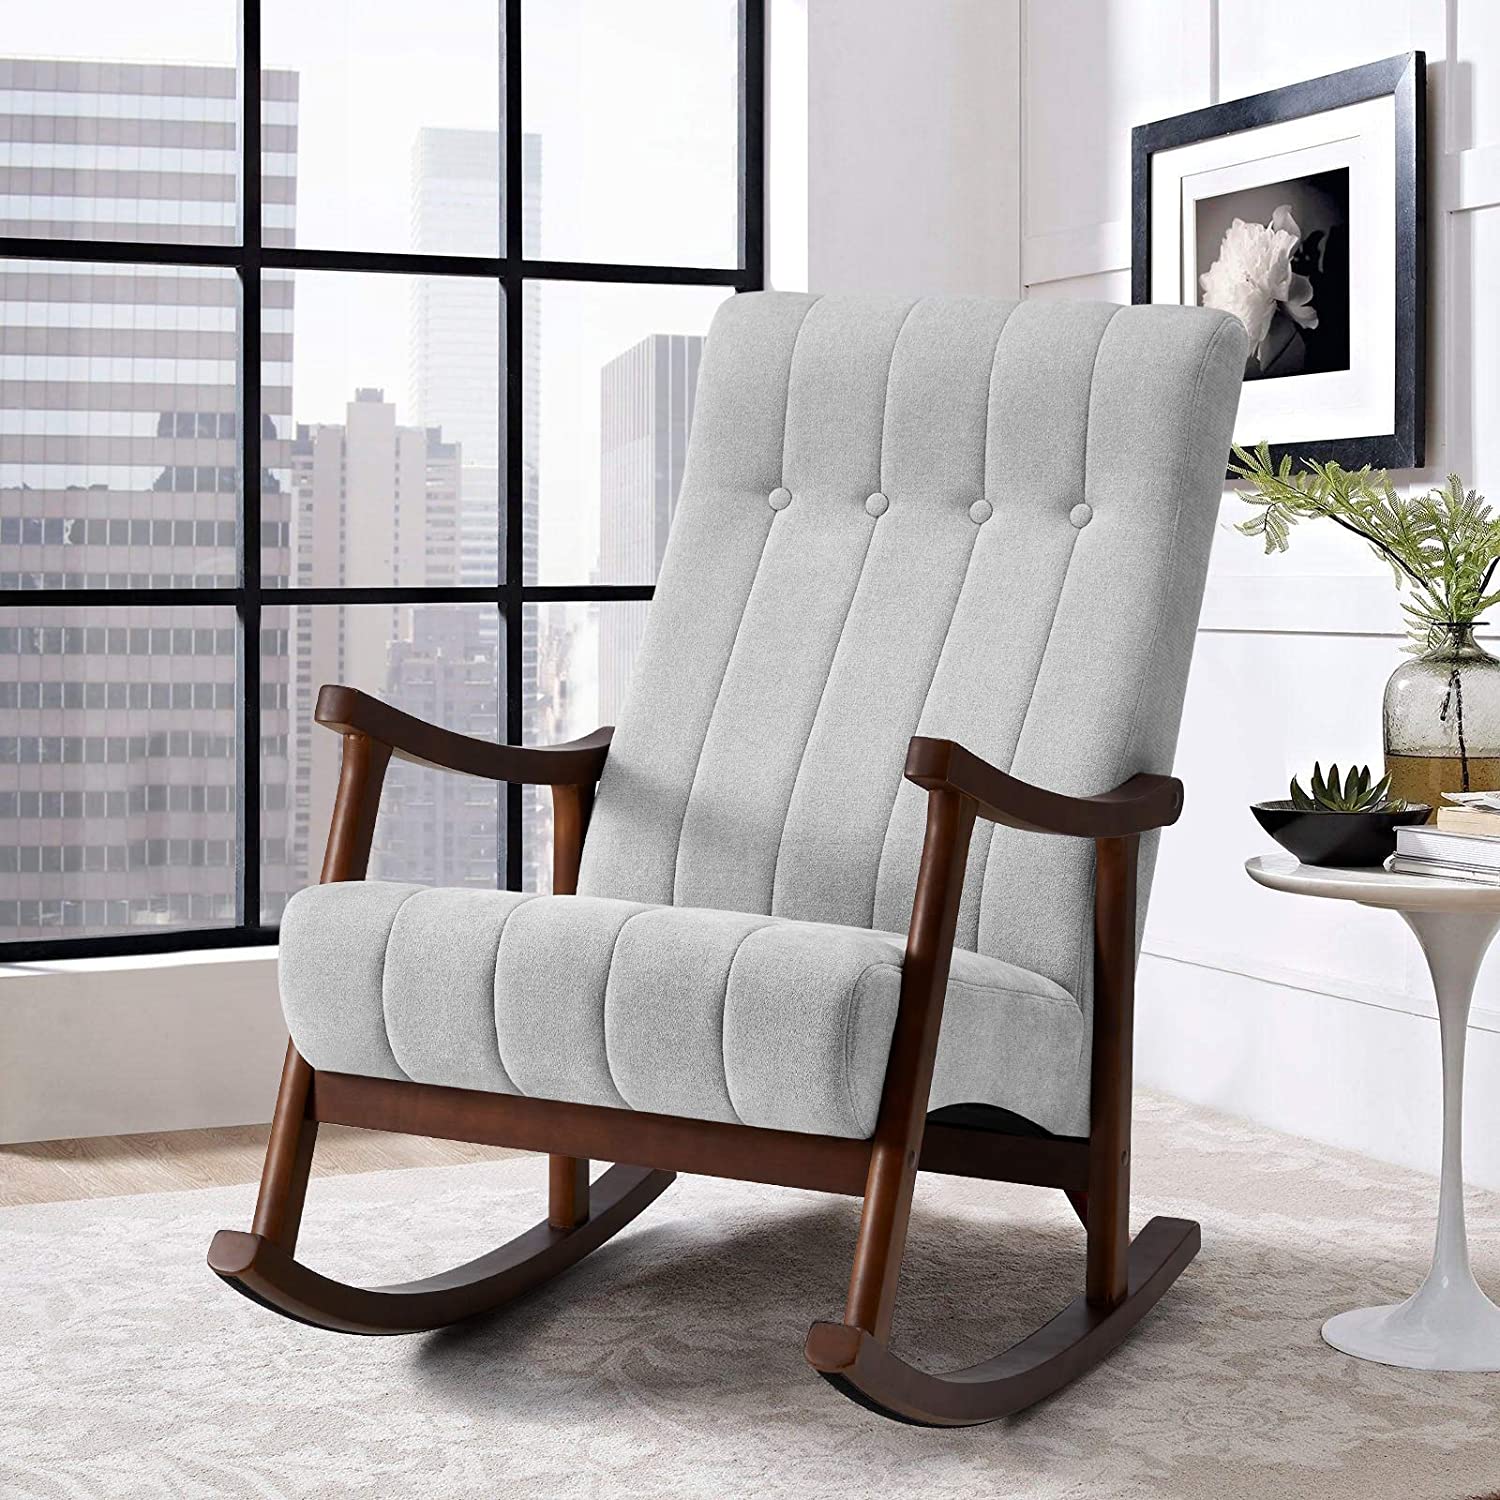 Whole Avawing Upholstered Rocking Chair With Fabric Padded Seat Comfortable Rocker Solid Wood For Living Room Modern High Back Armchair Single Sofa Old Man Supply Leader